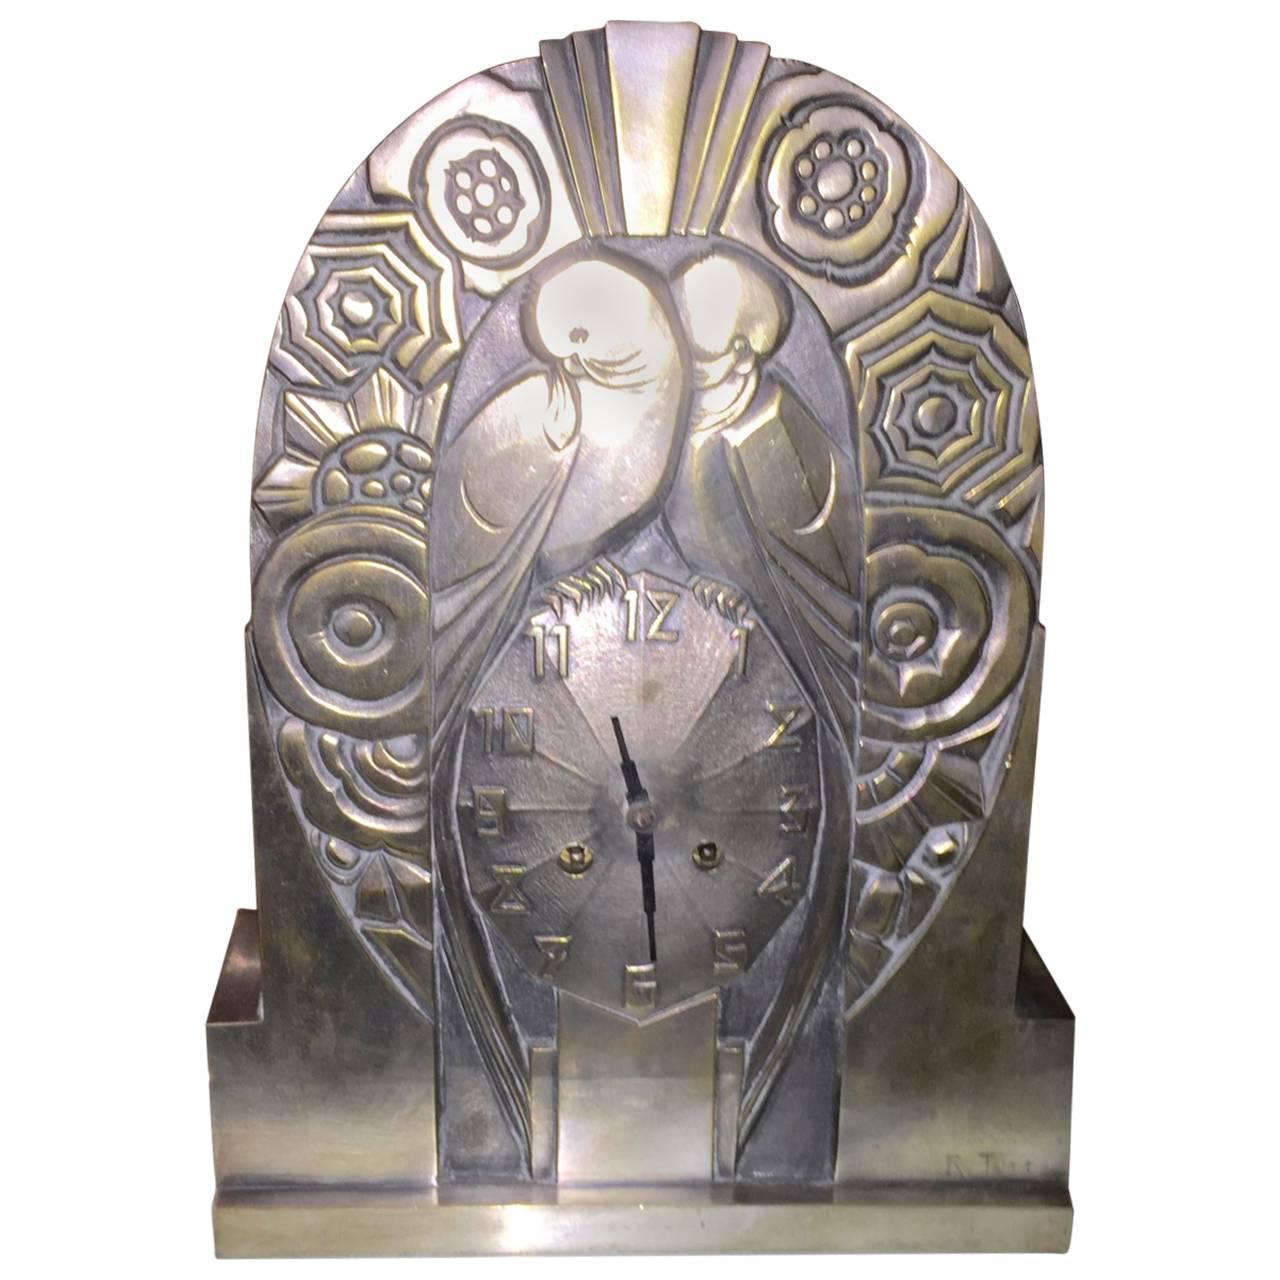 French Art Deco Nickeled Bronze Clock by R. Terras